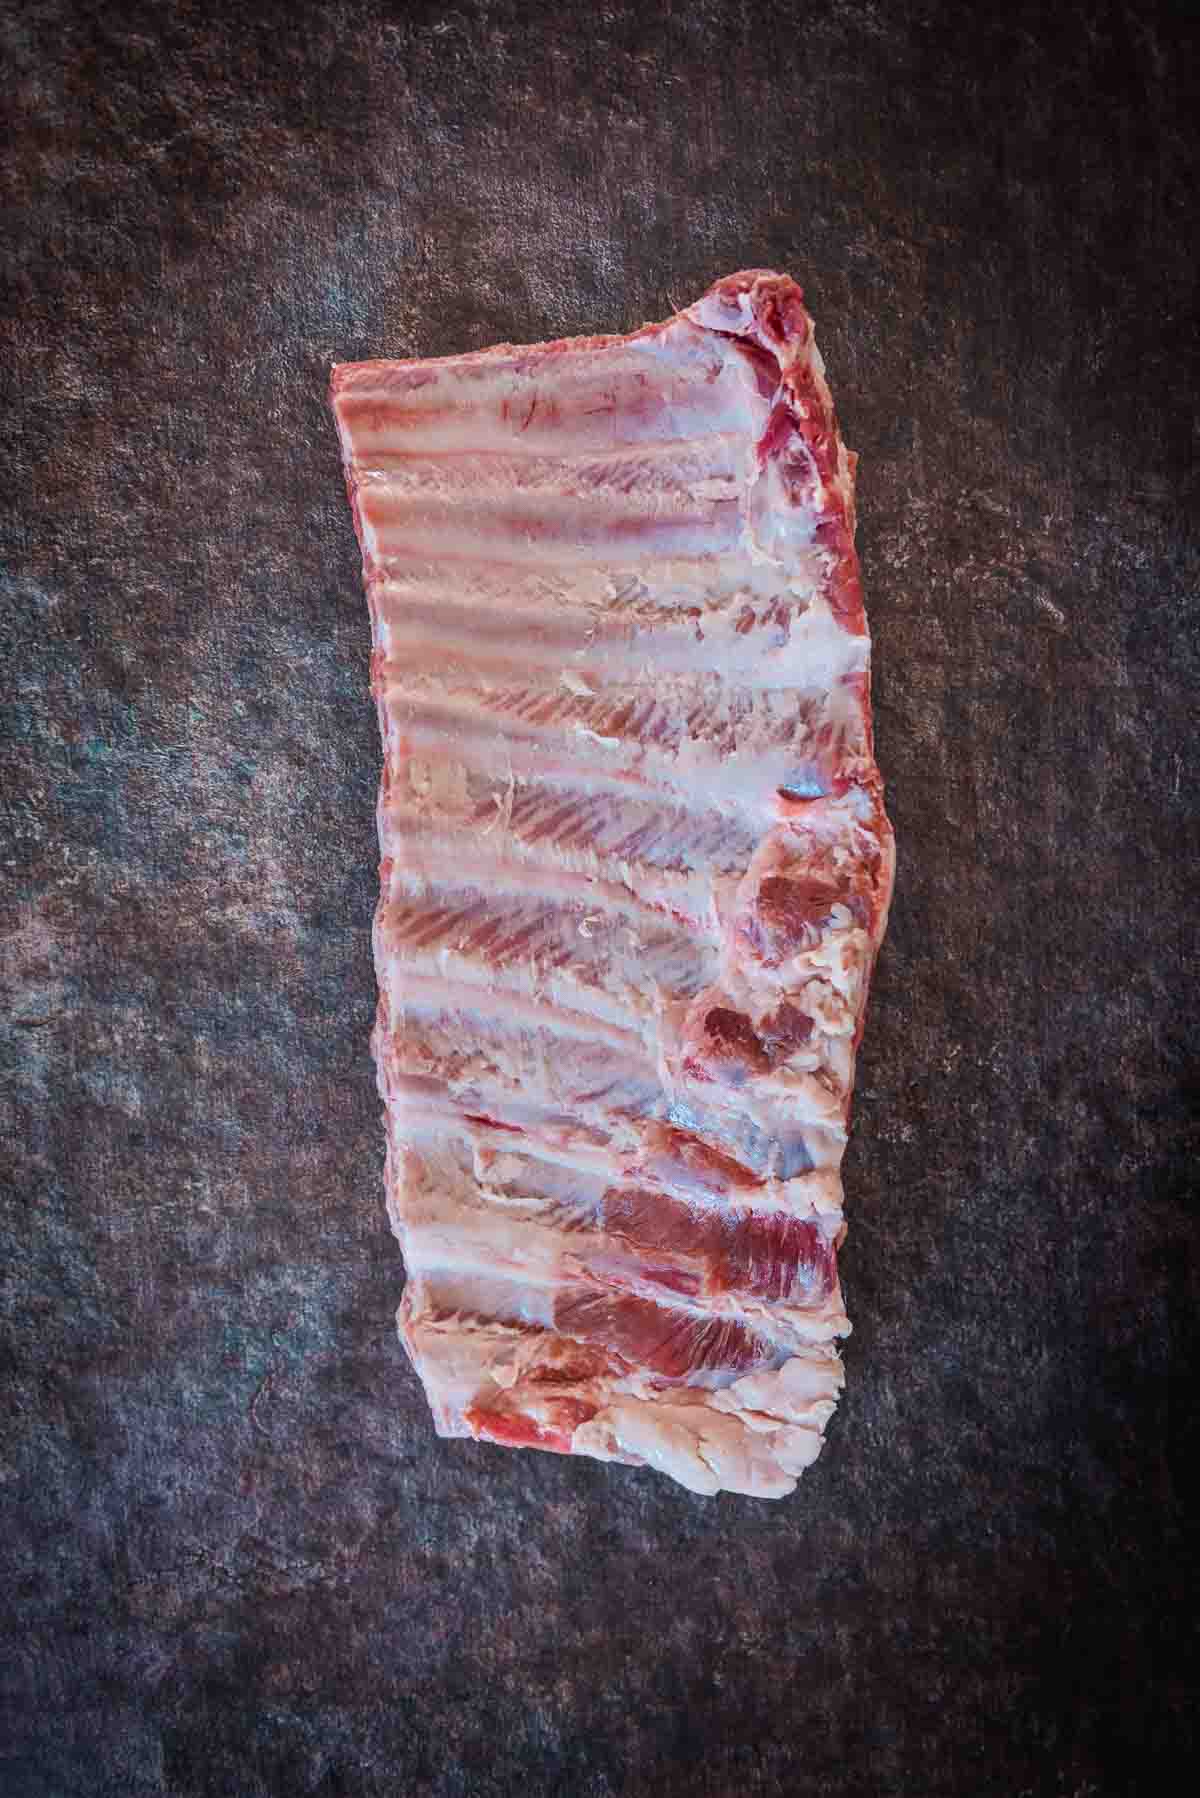 Bone side of a full spare rib rack showing membrane removed.